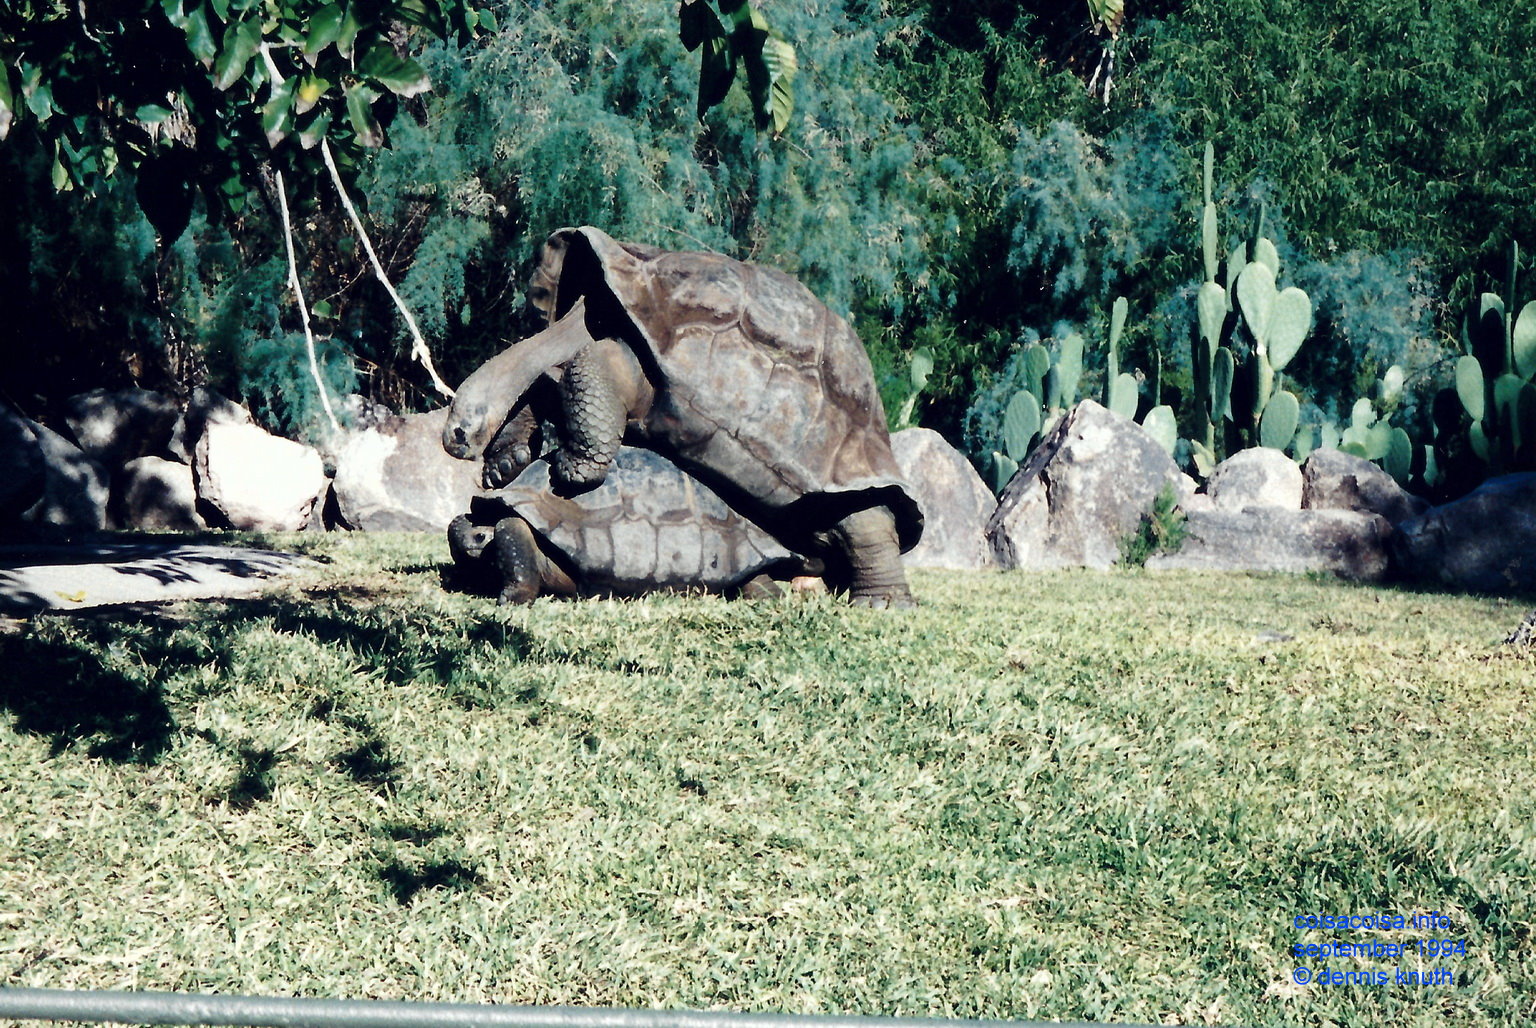 Tortoises doing it at the the Phoenix Zoo in September